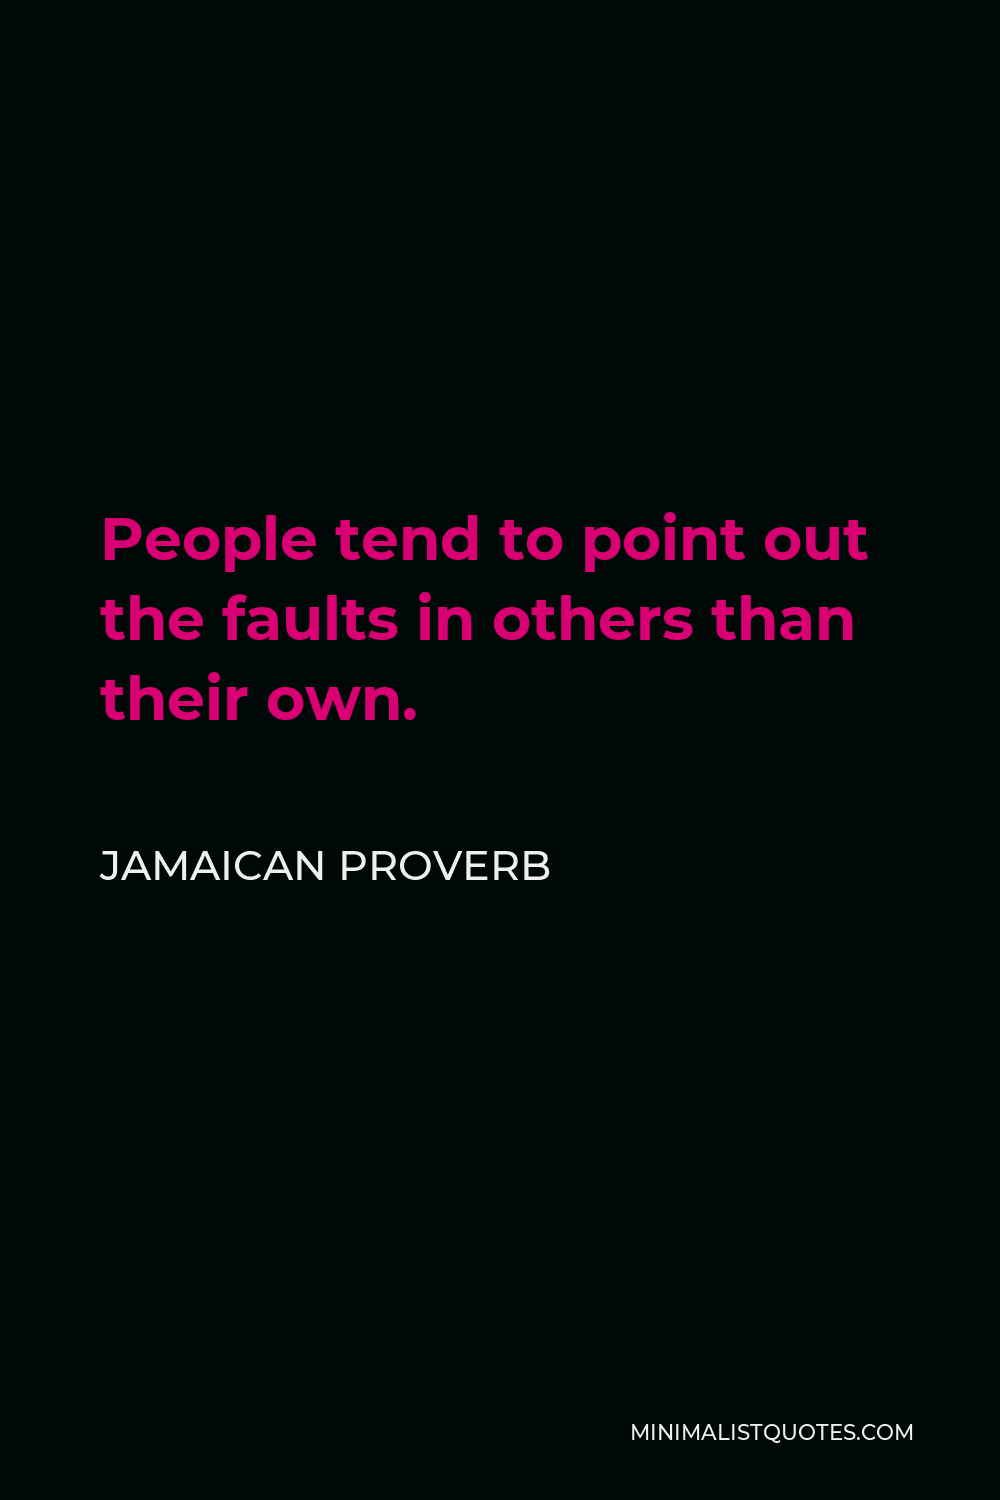 Jamaican Proverb Quote - People tend to point out the faults in others than their own.